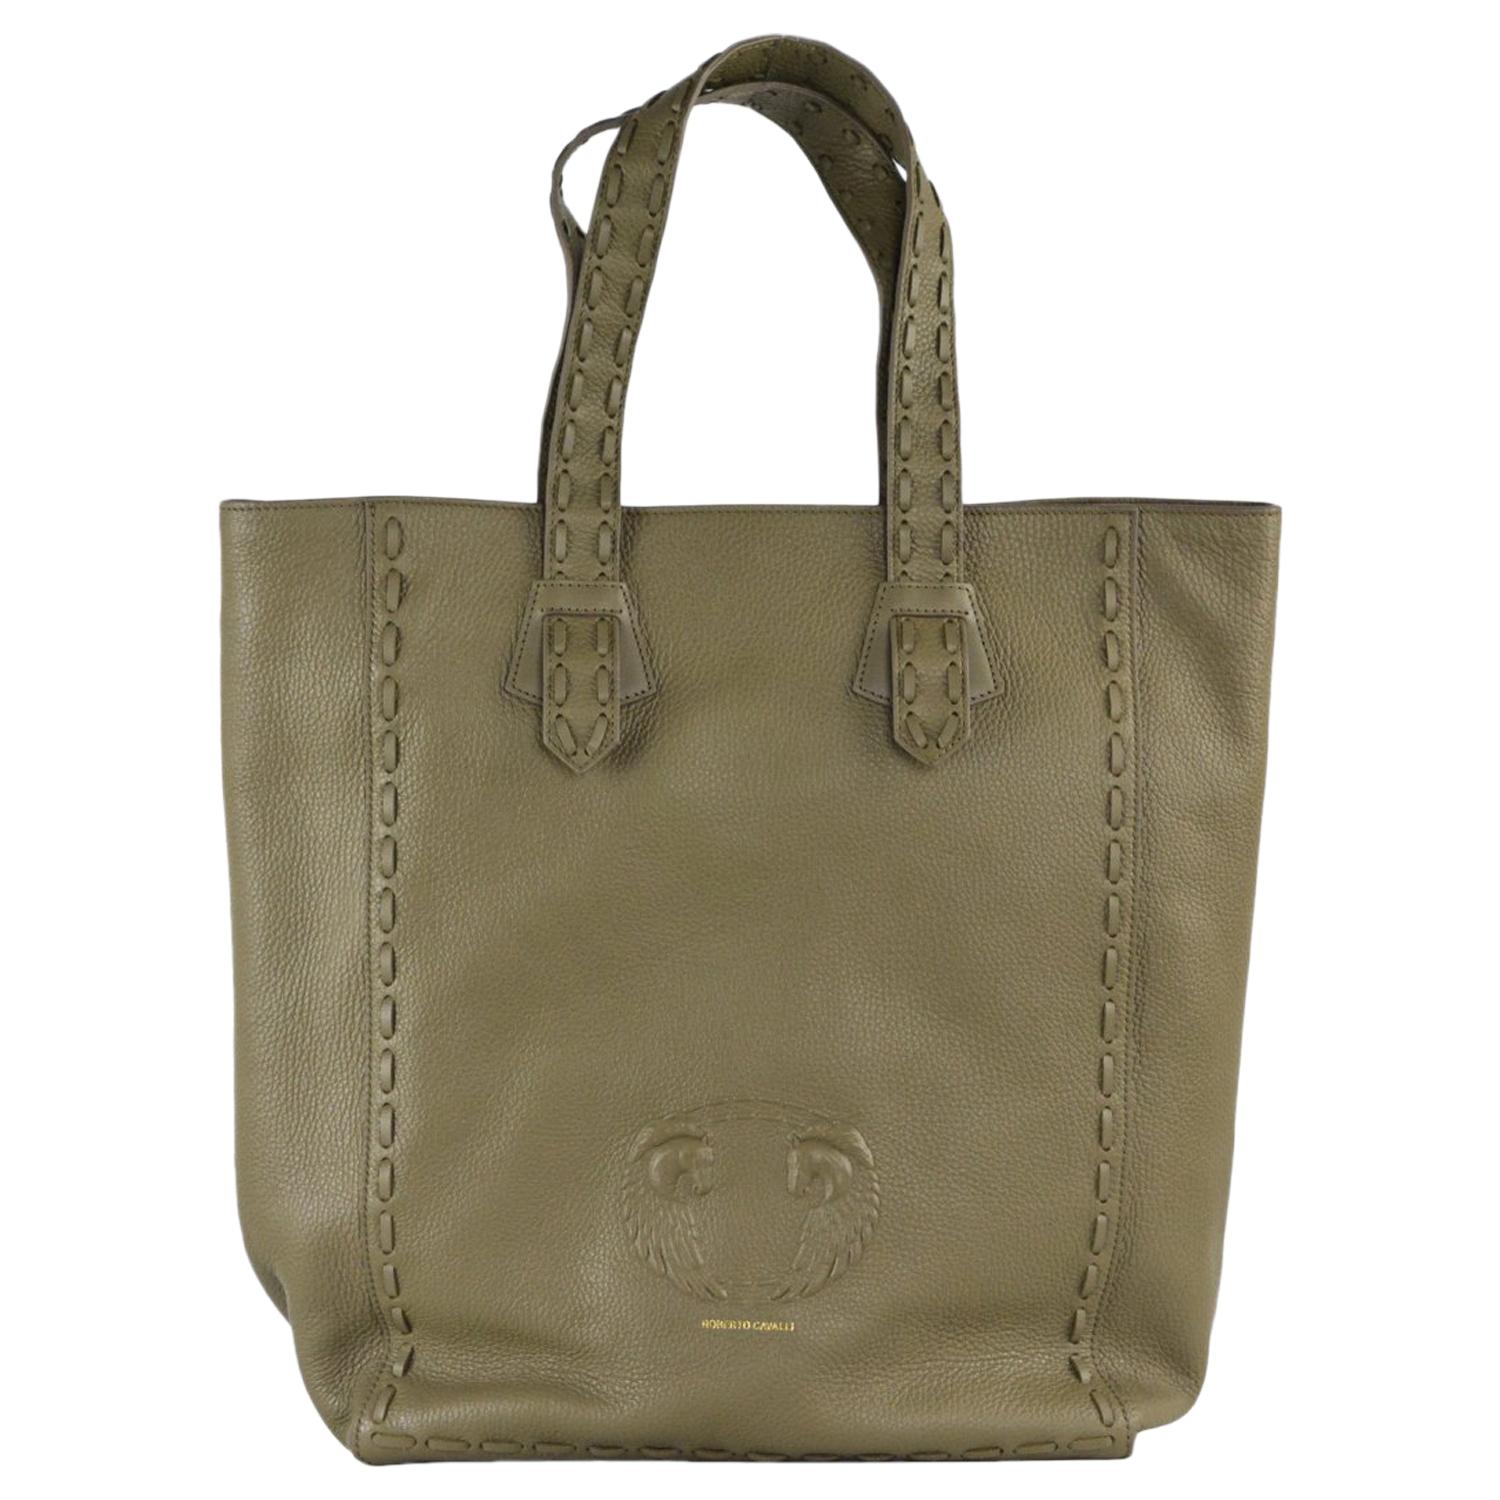 Roberto Cavalli Olive Green Grained Leather Stitched Trim Tote Bag For Sale